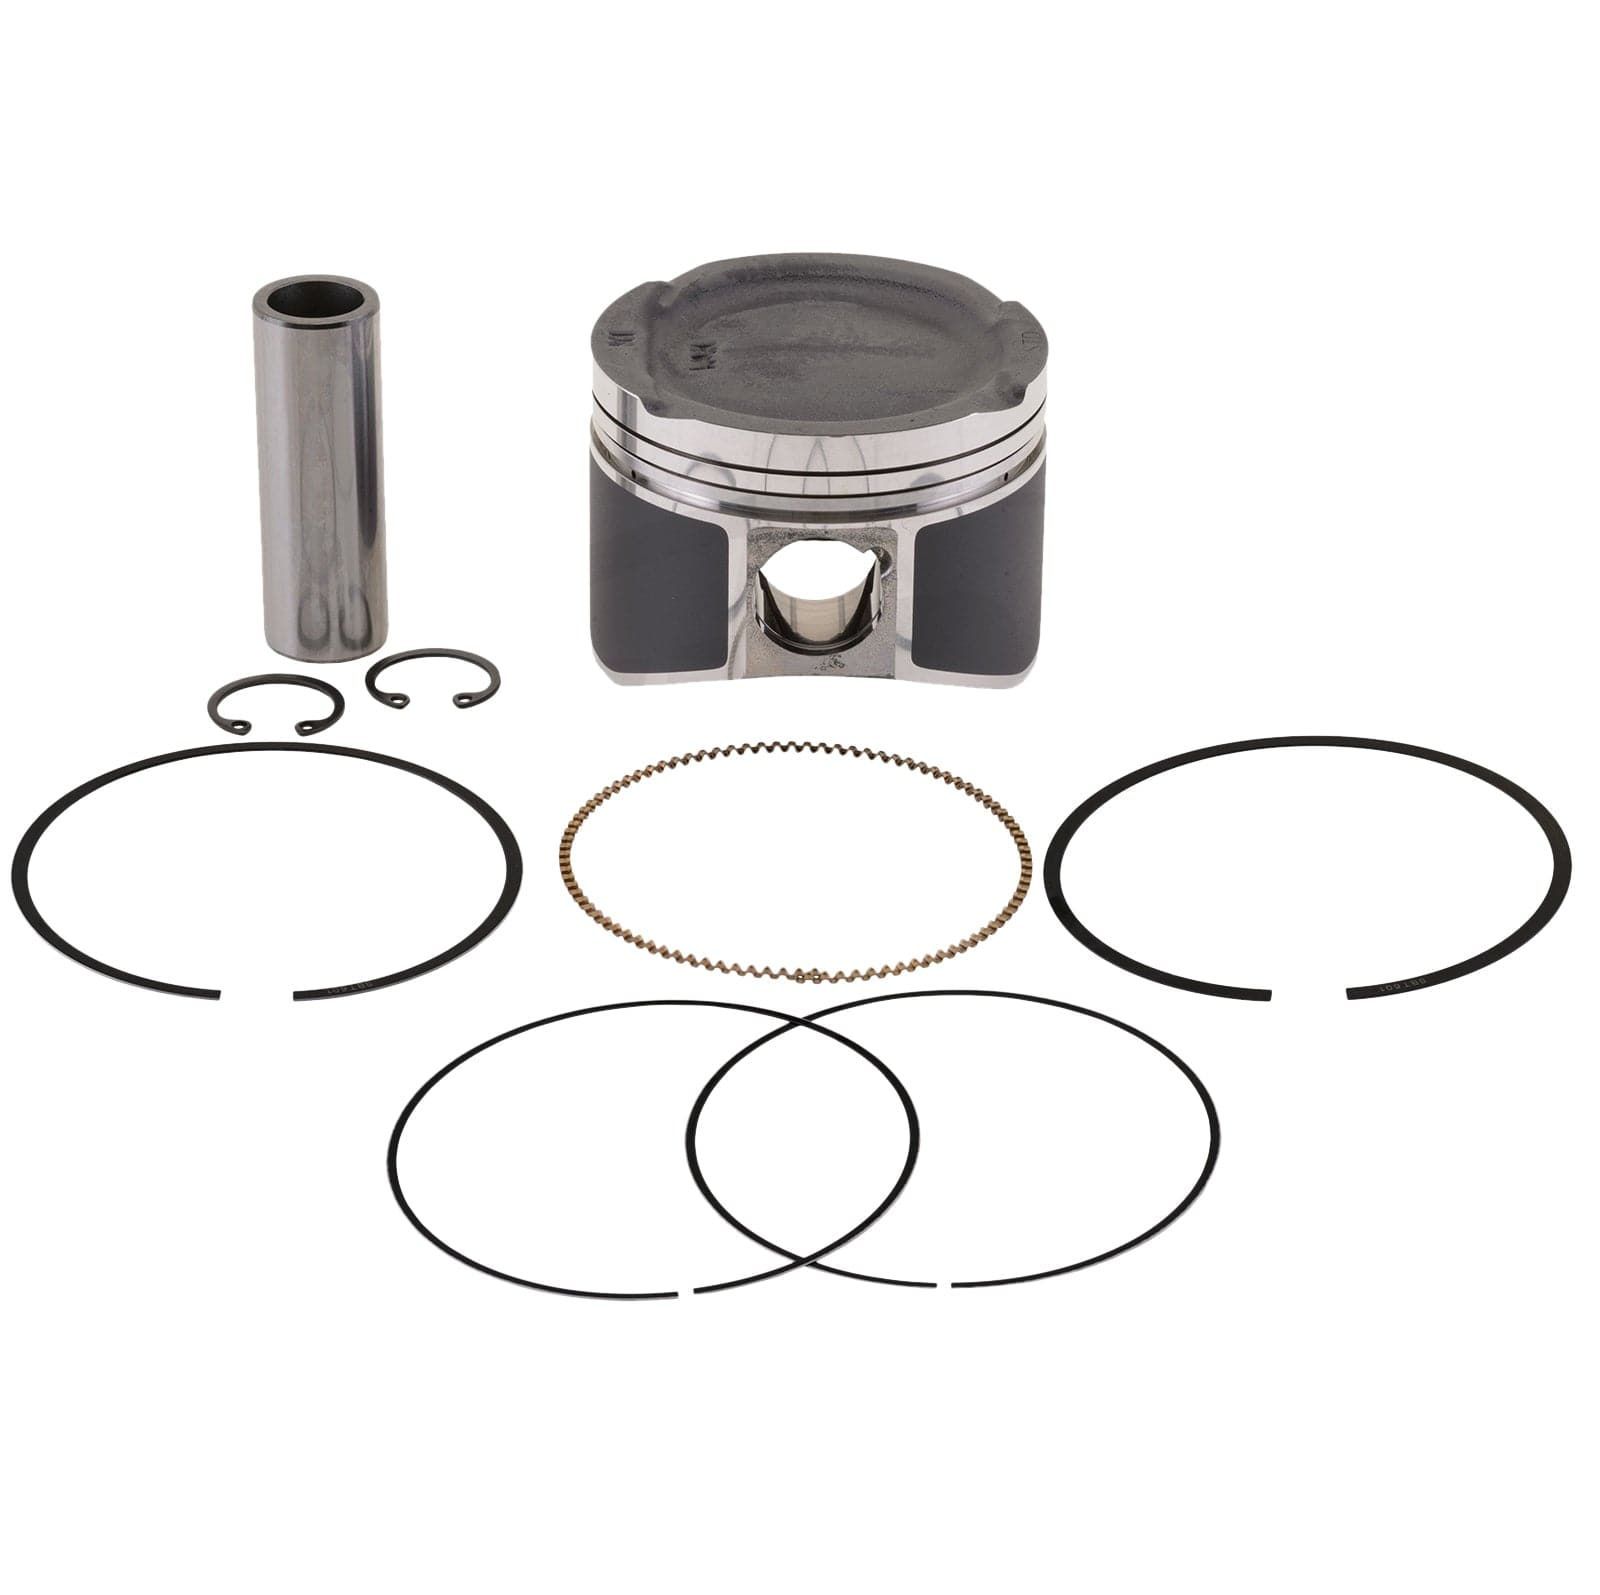 Piston Kits & Ring Sets for Jet Skis | Watercraft Superstore